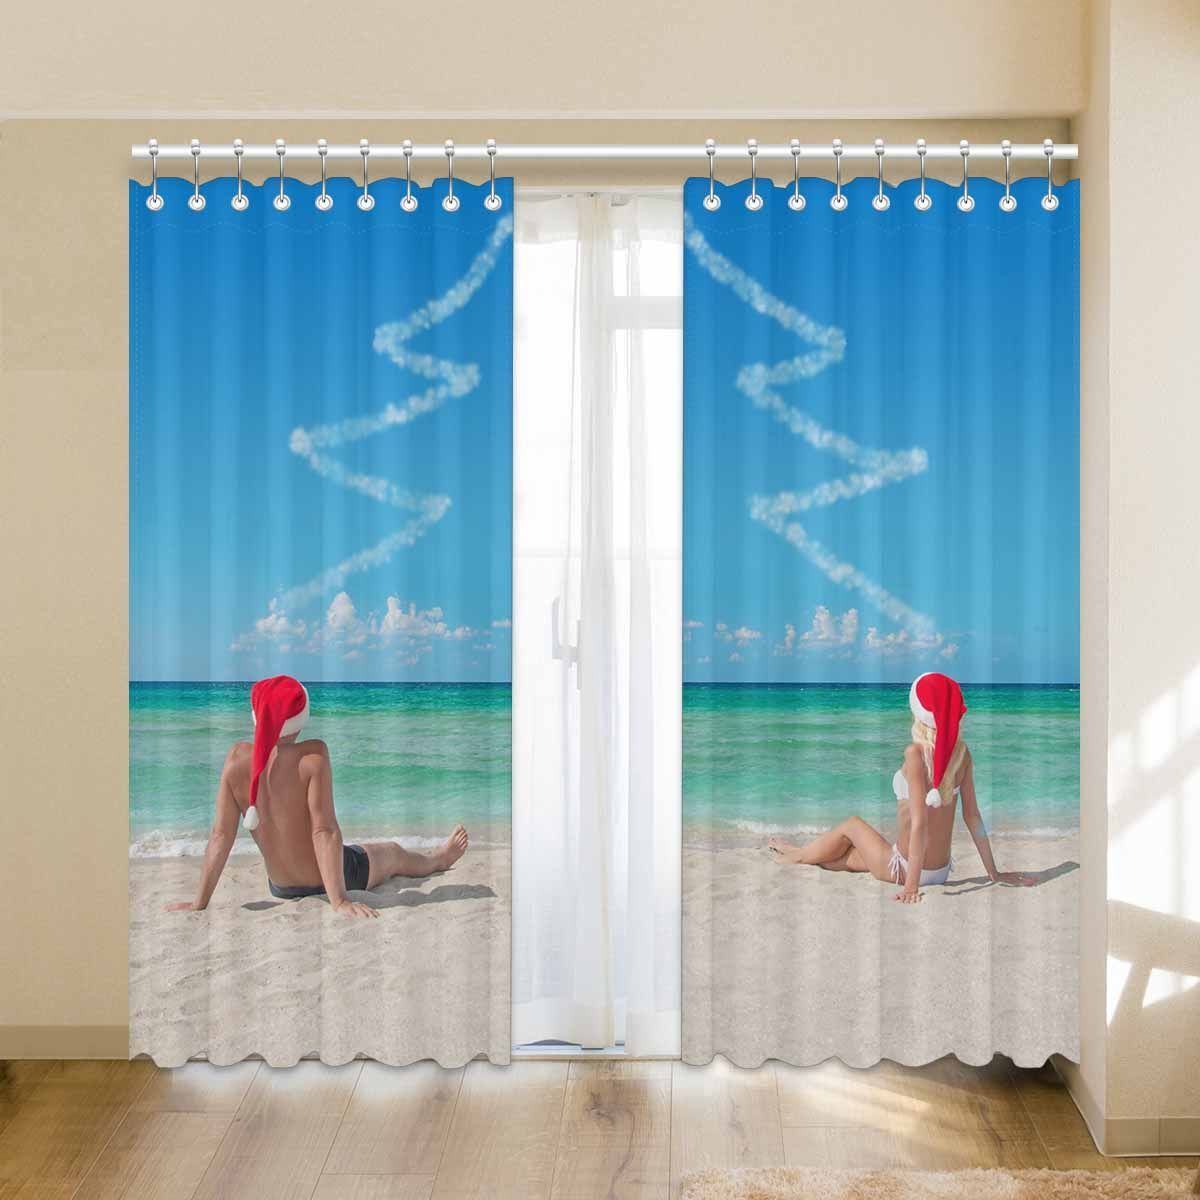 Lovers Couple In Santa Hats At Tropical Sandy Printed Window Curtain